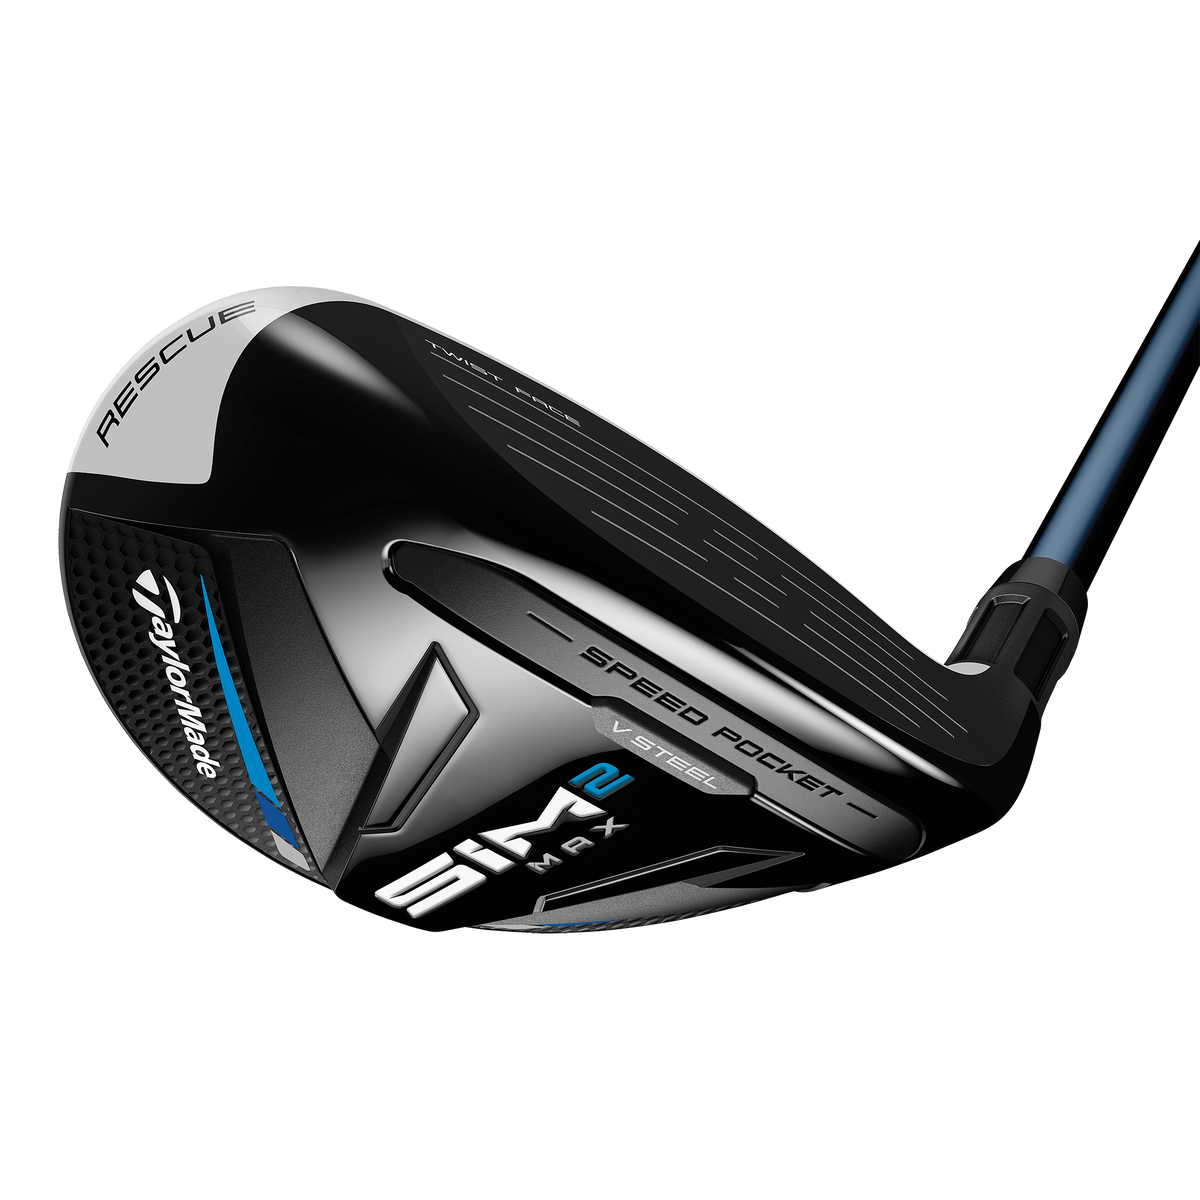 TaylorMade SIM2 Max Rescue · Right handed · Regular · 3H